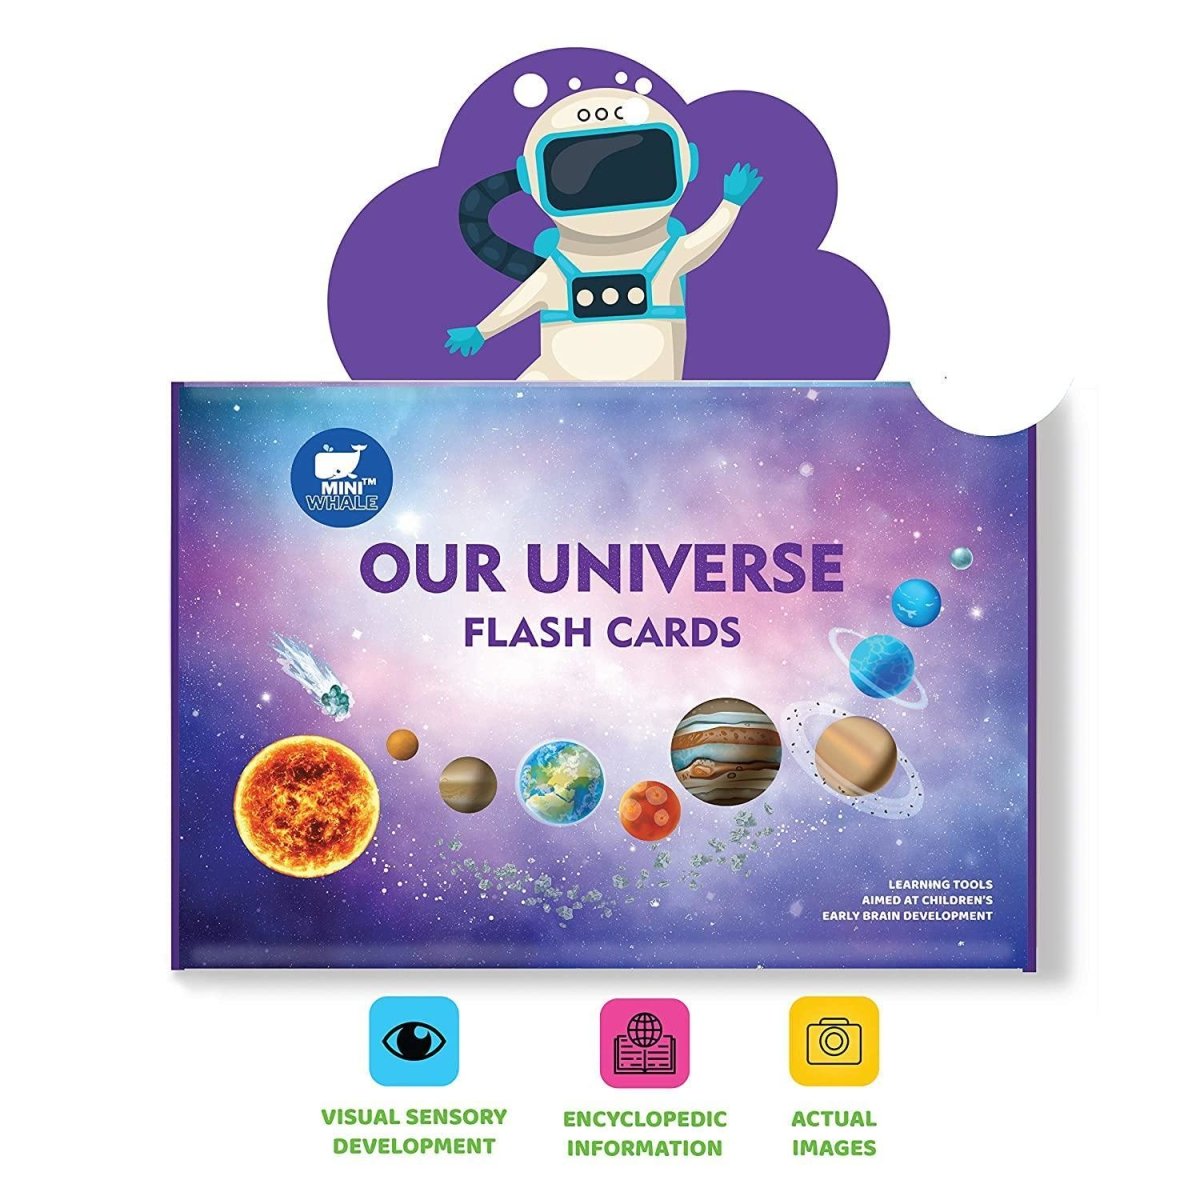 Our Universe Solar System Flash Cards is Educational Toys for Kids 3 Years freeshipping - Zigyasaw